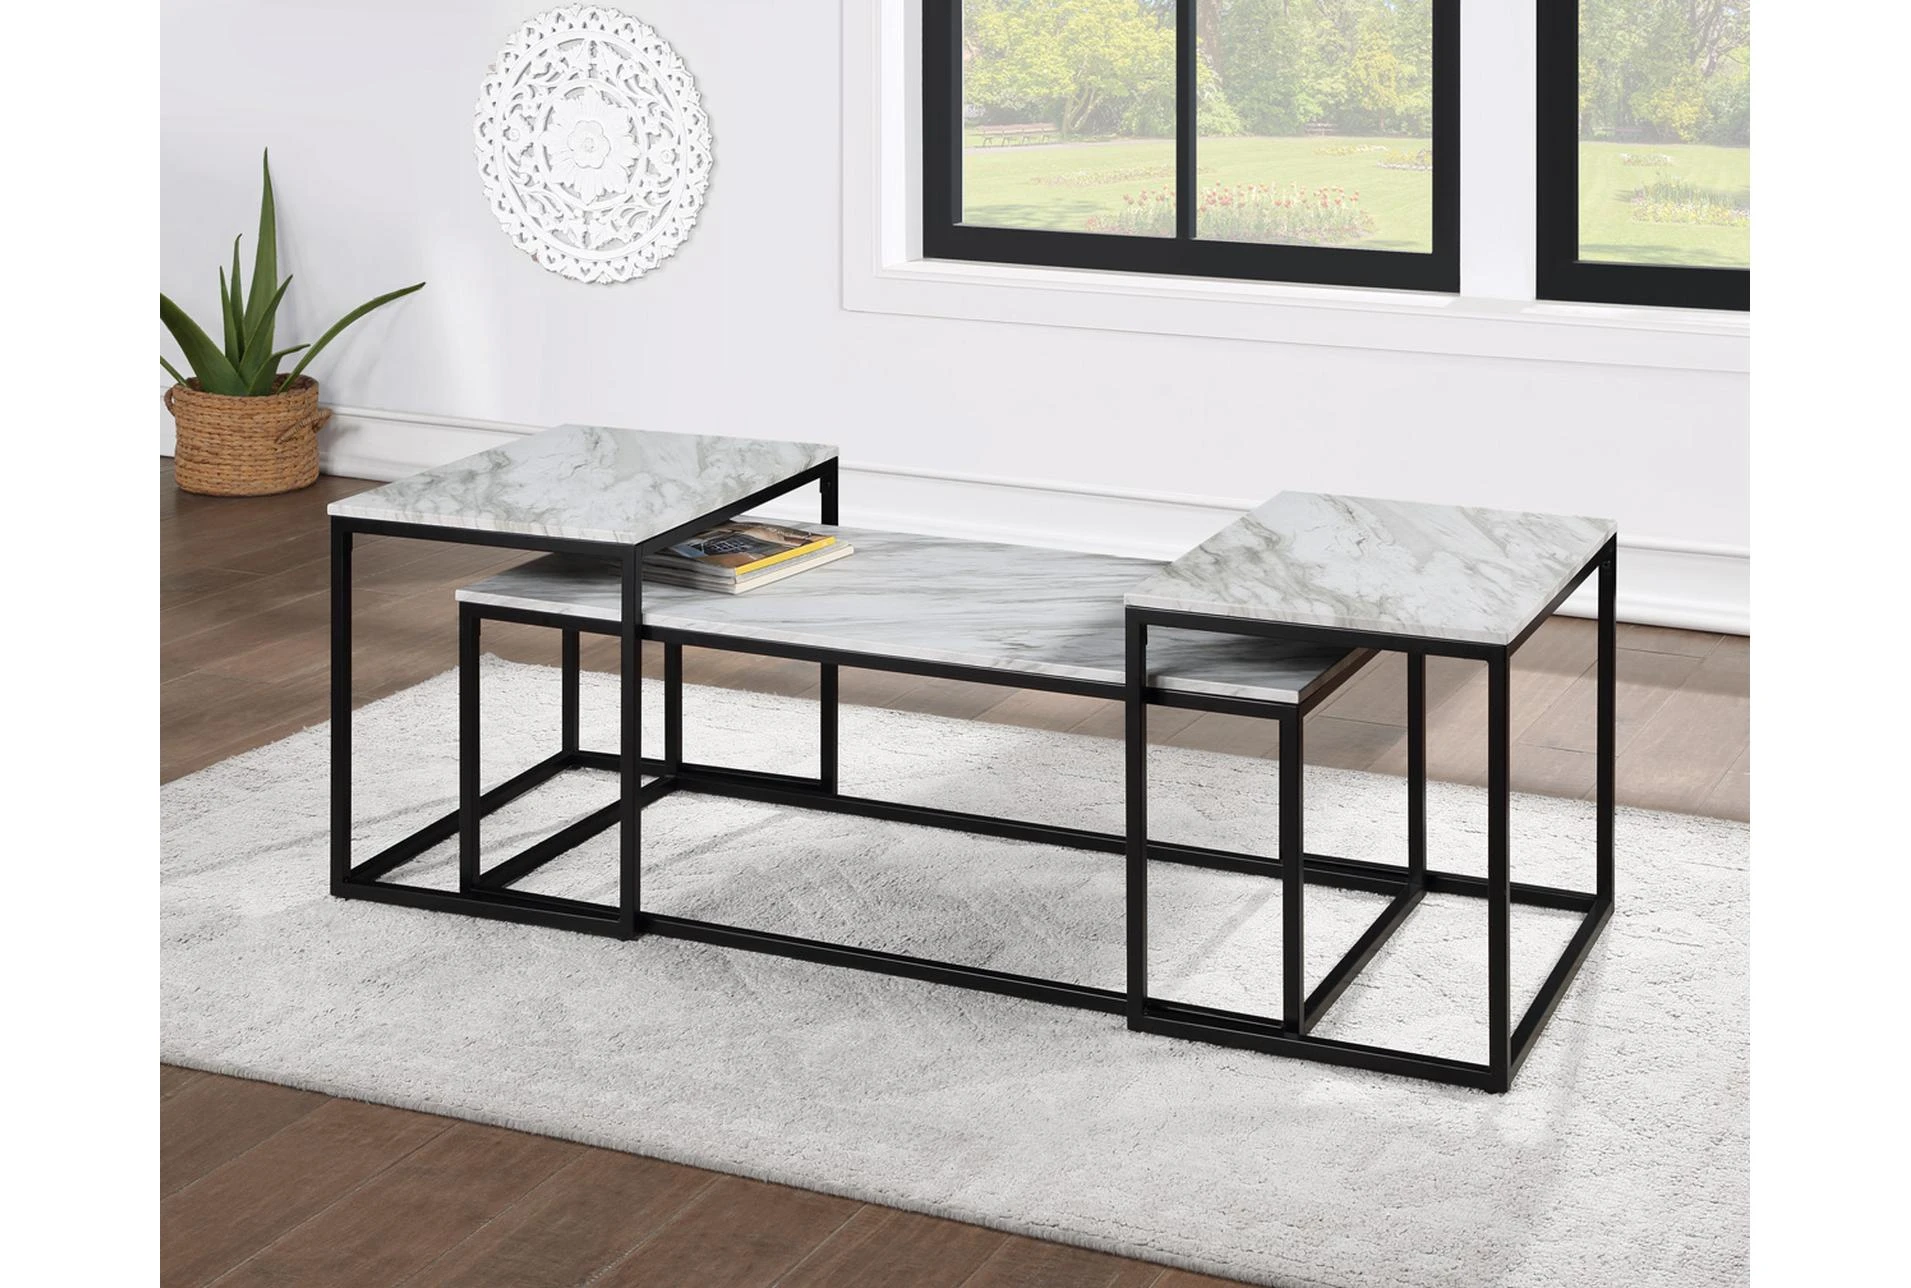 Lola 3 Piece Nesting Tables | Living Spaces